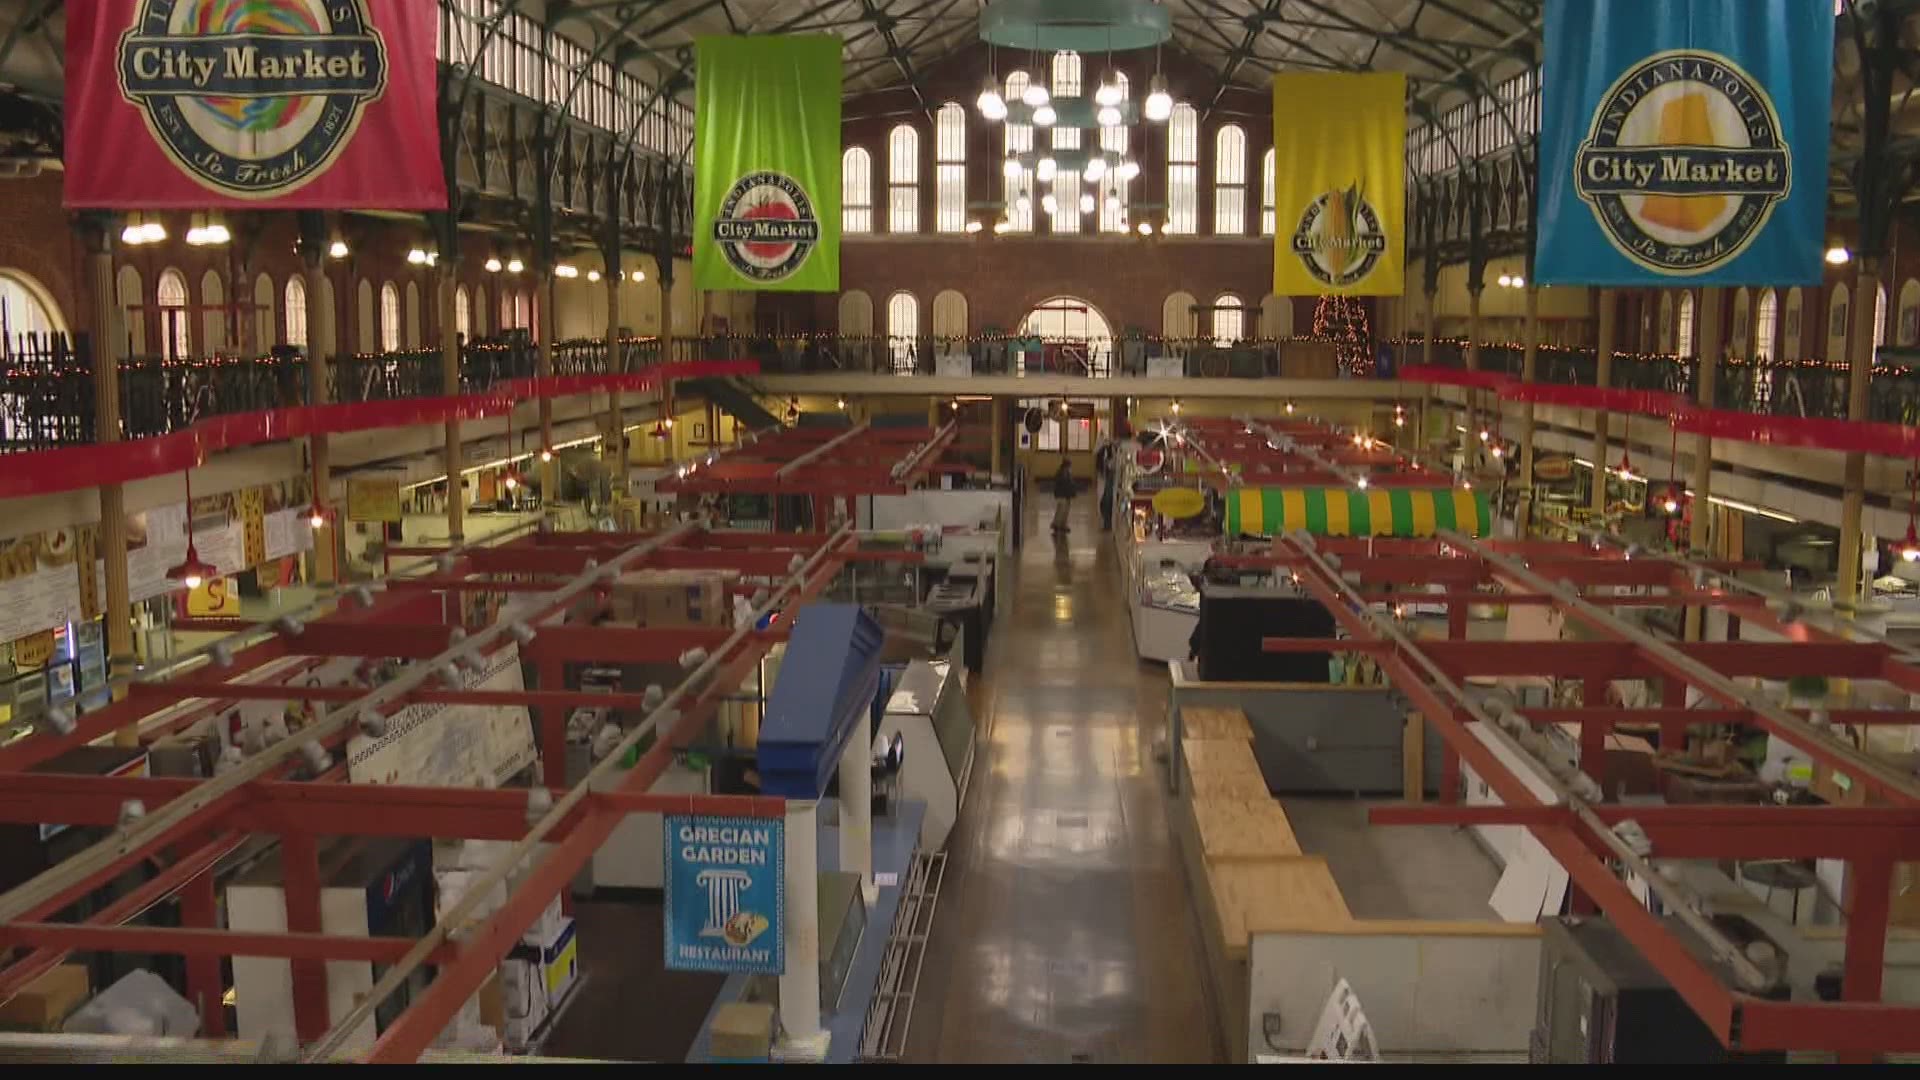 City Market has long been a lunch destination for downtown workers, now vendors say it's down to a few dozen - if that.